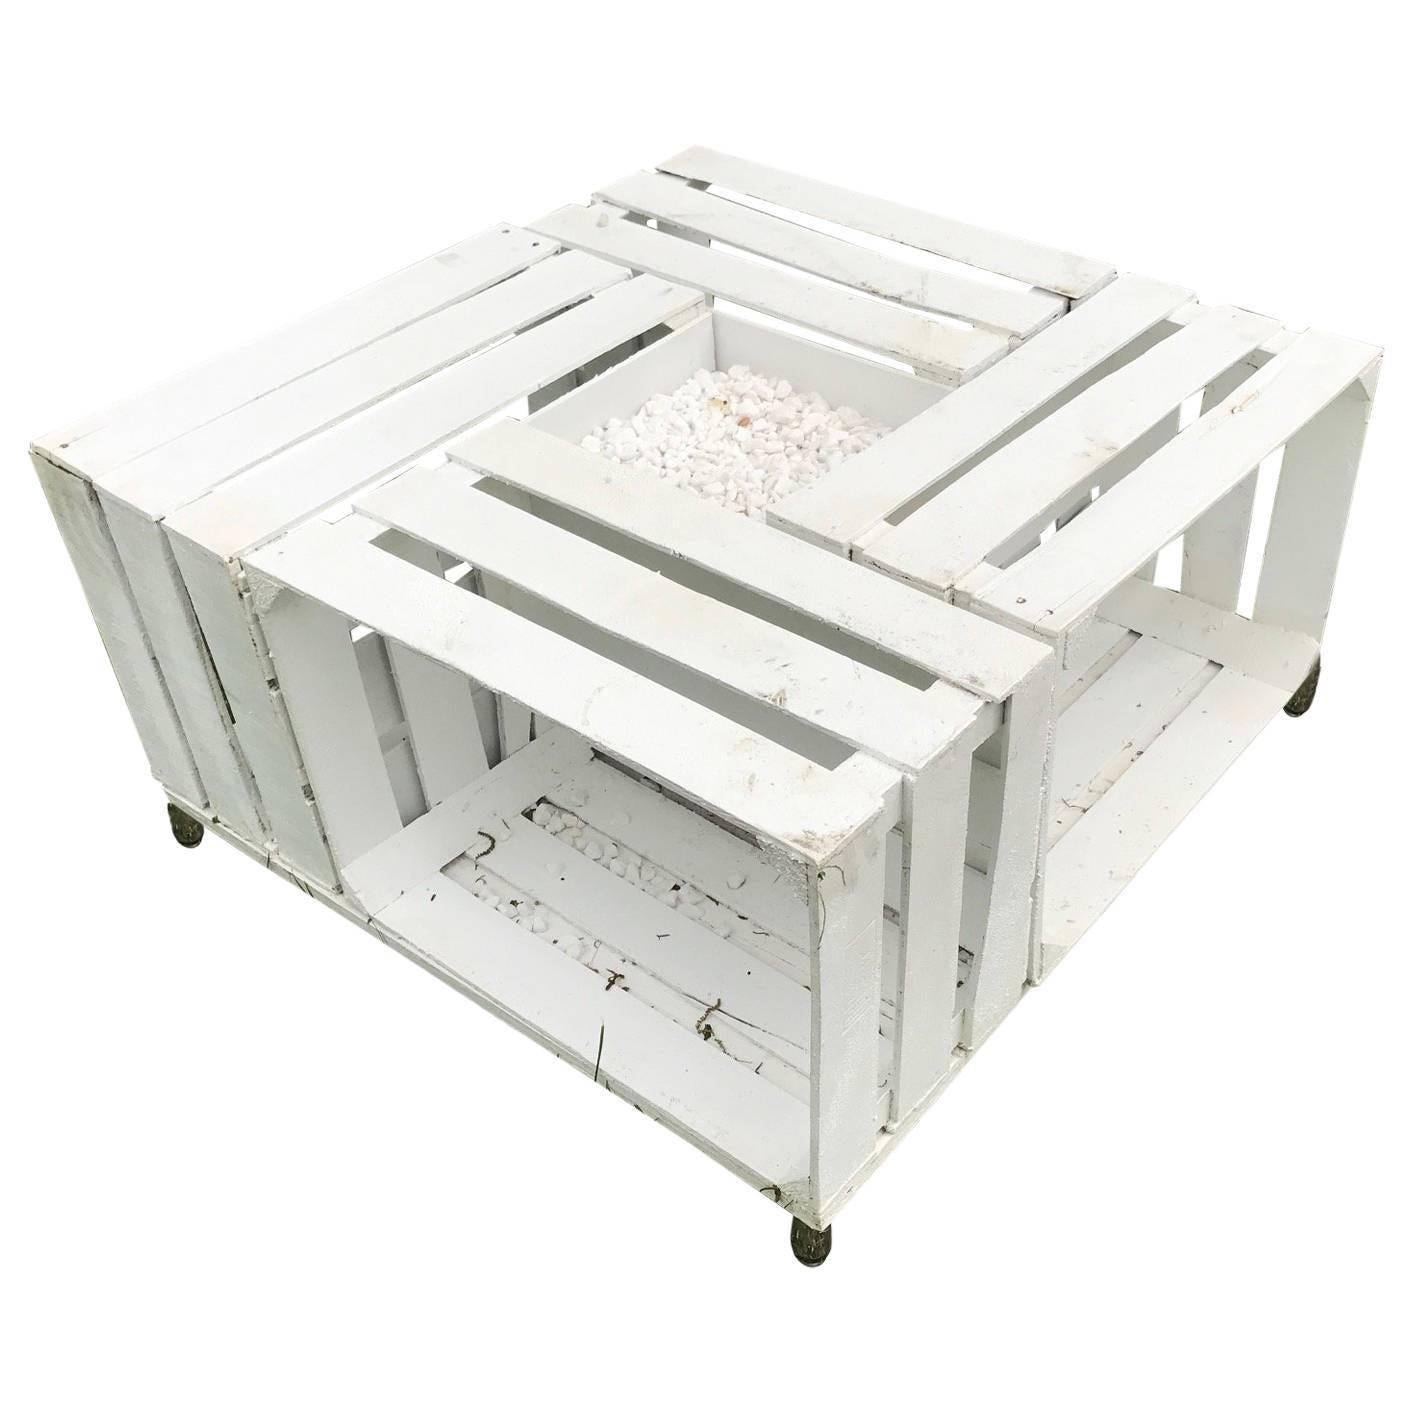 Handmade Outdoor Pallet Wood Painted White with Gravel Center Table